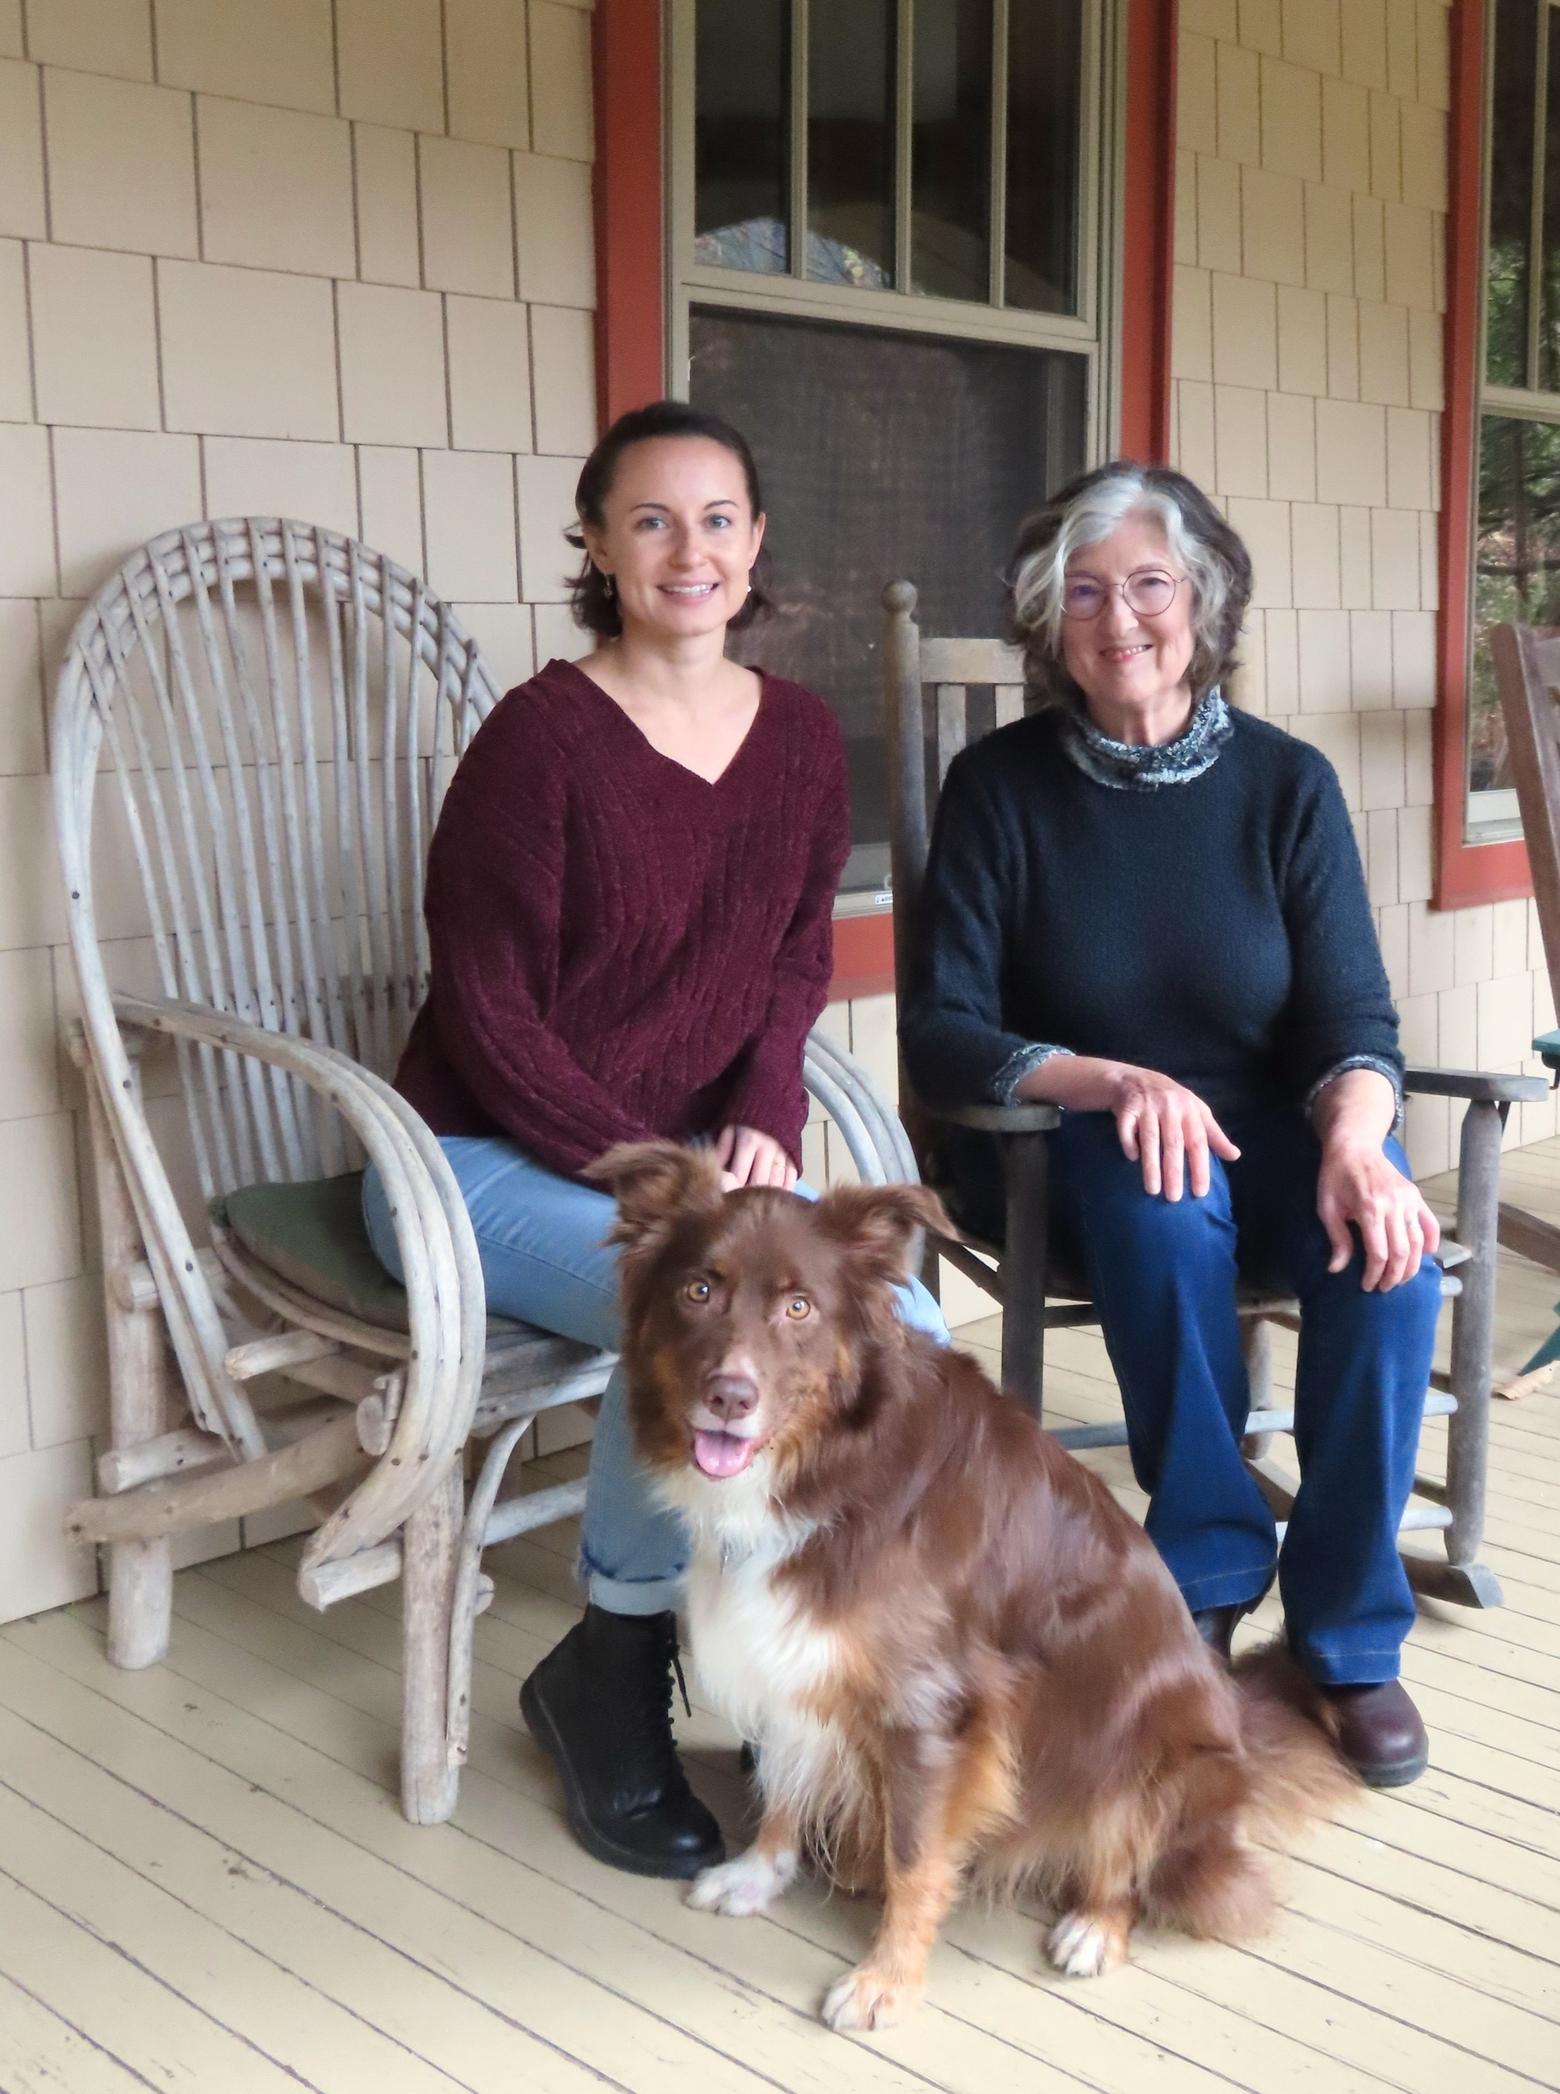 Before the recent Thanksgiving holiday, Lily and Barbara Kingsolver didn't have any author photos together. They planned to use the family gathering as an opportunity to take a few, accompanied by Lily's dog, Ginger. Photo by Steven Hopp